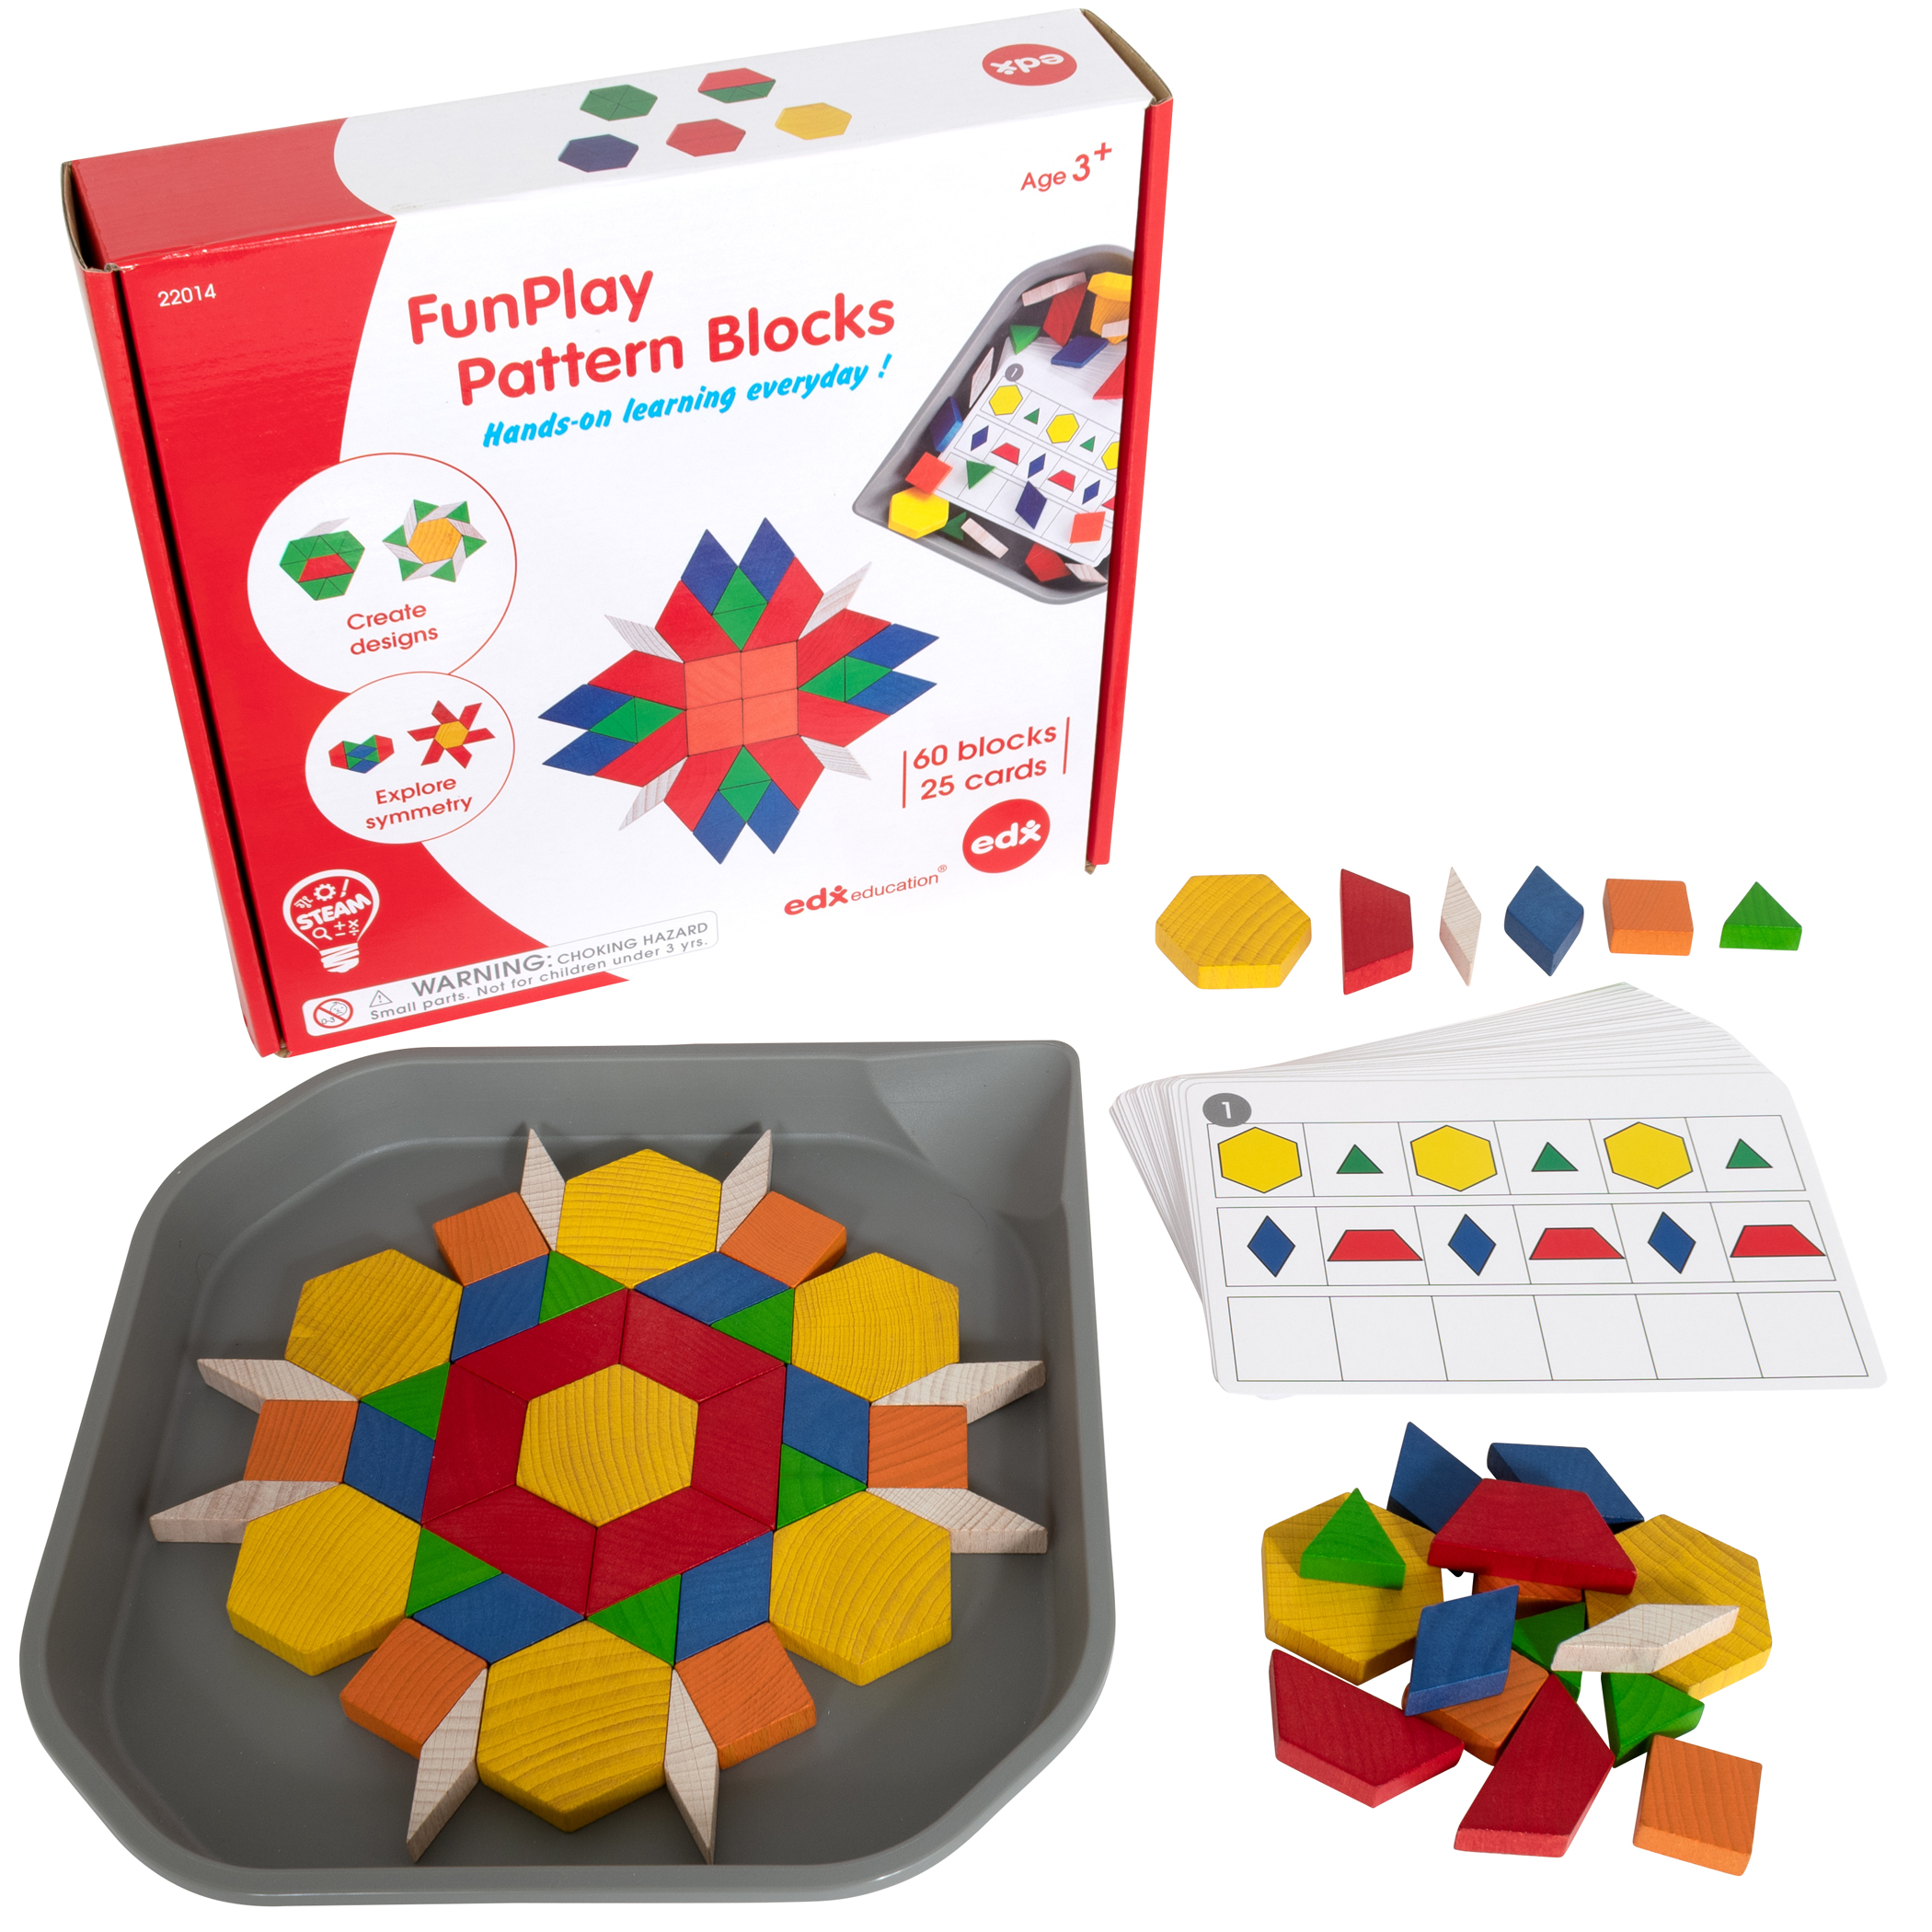 edxeducation FunPlay Pattern Blocks - Set of 60 Wooden Math Manipulatives + 50 Activities + Messy Tray image number null